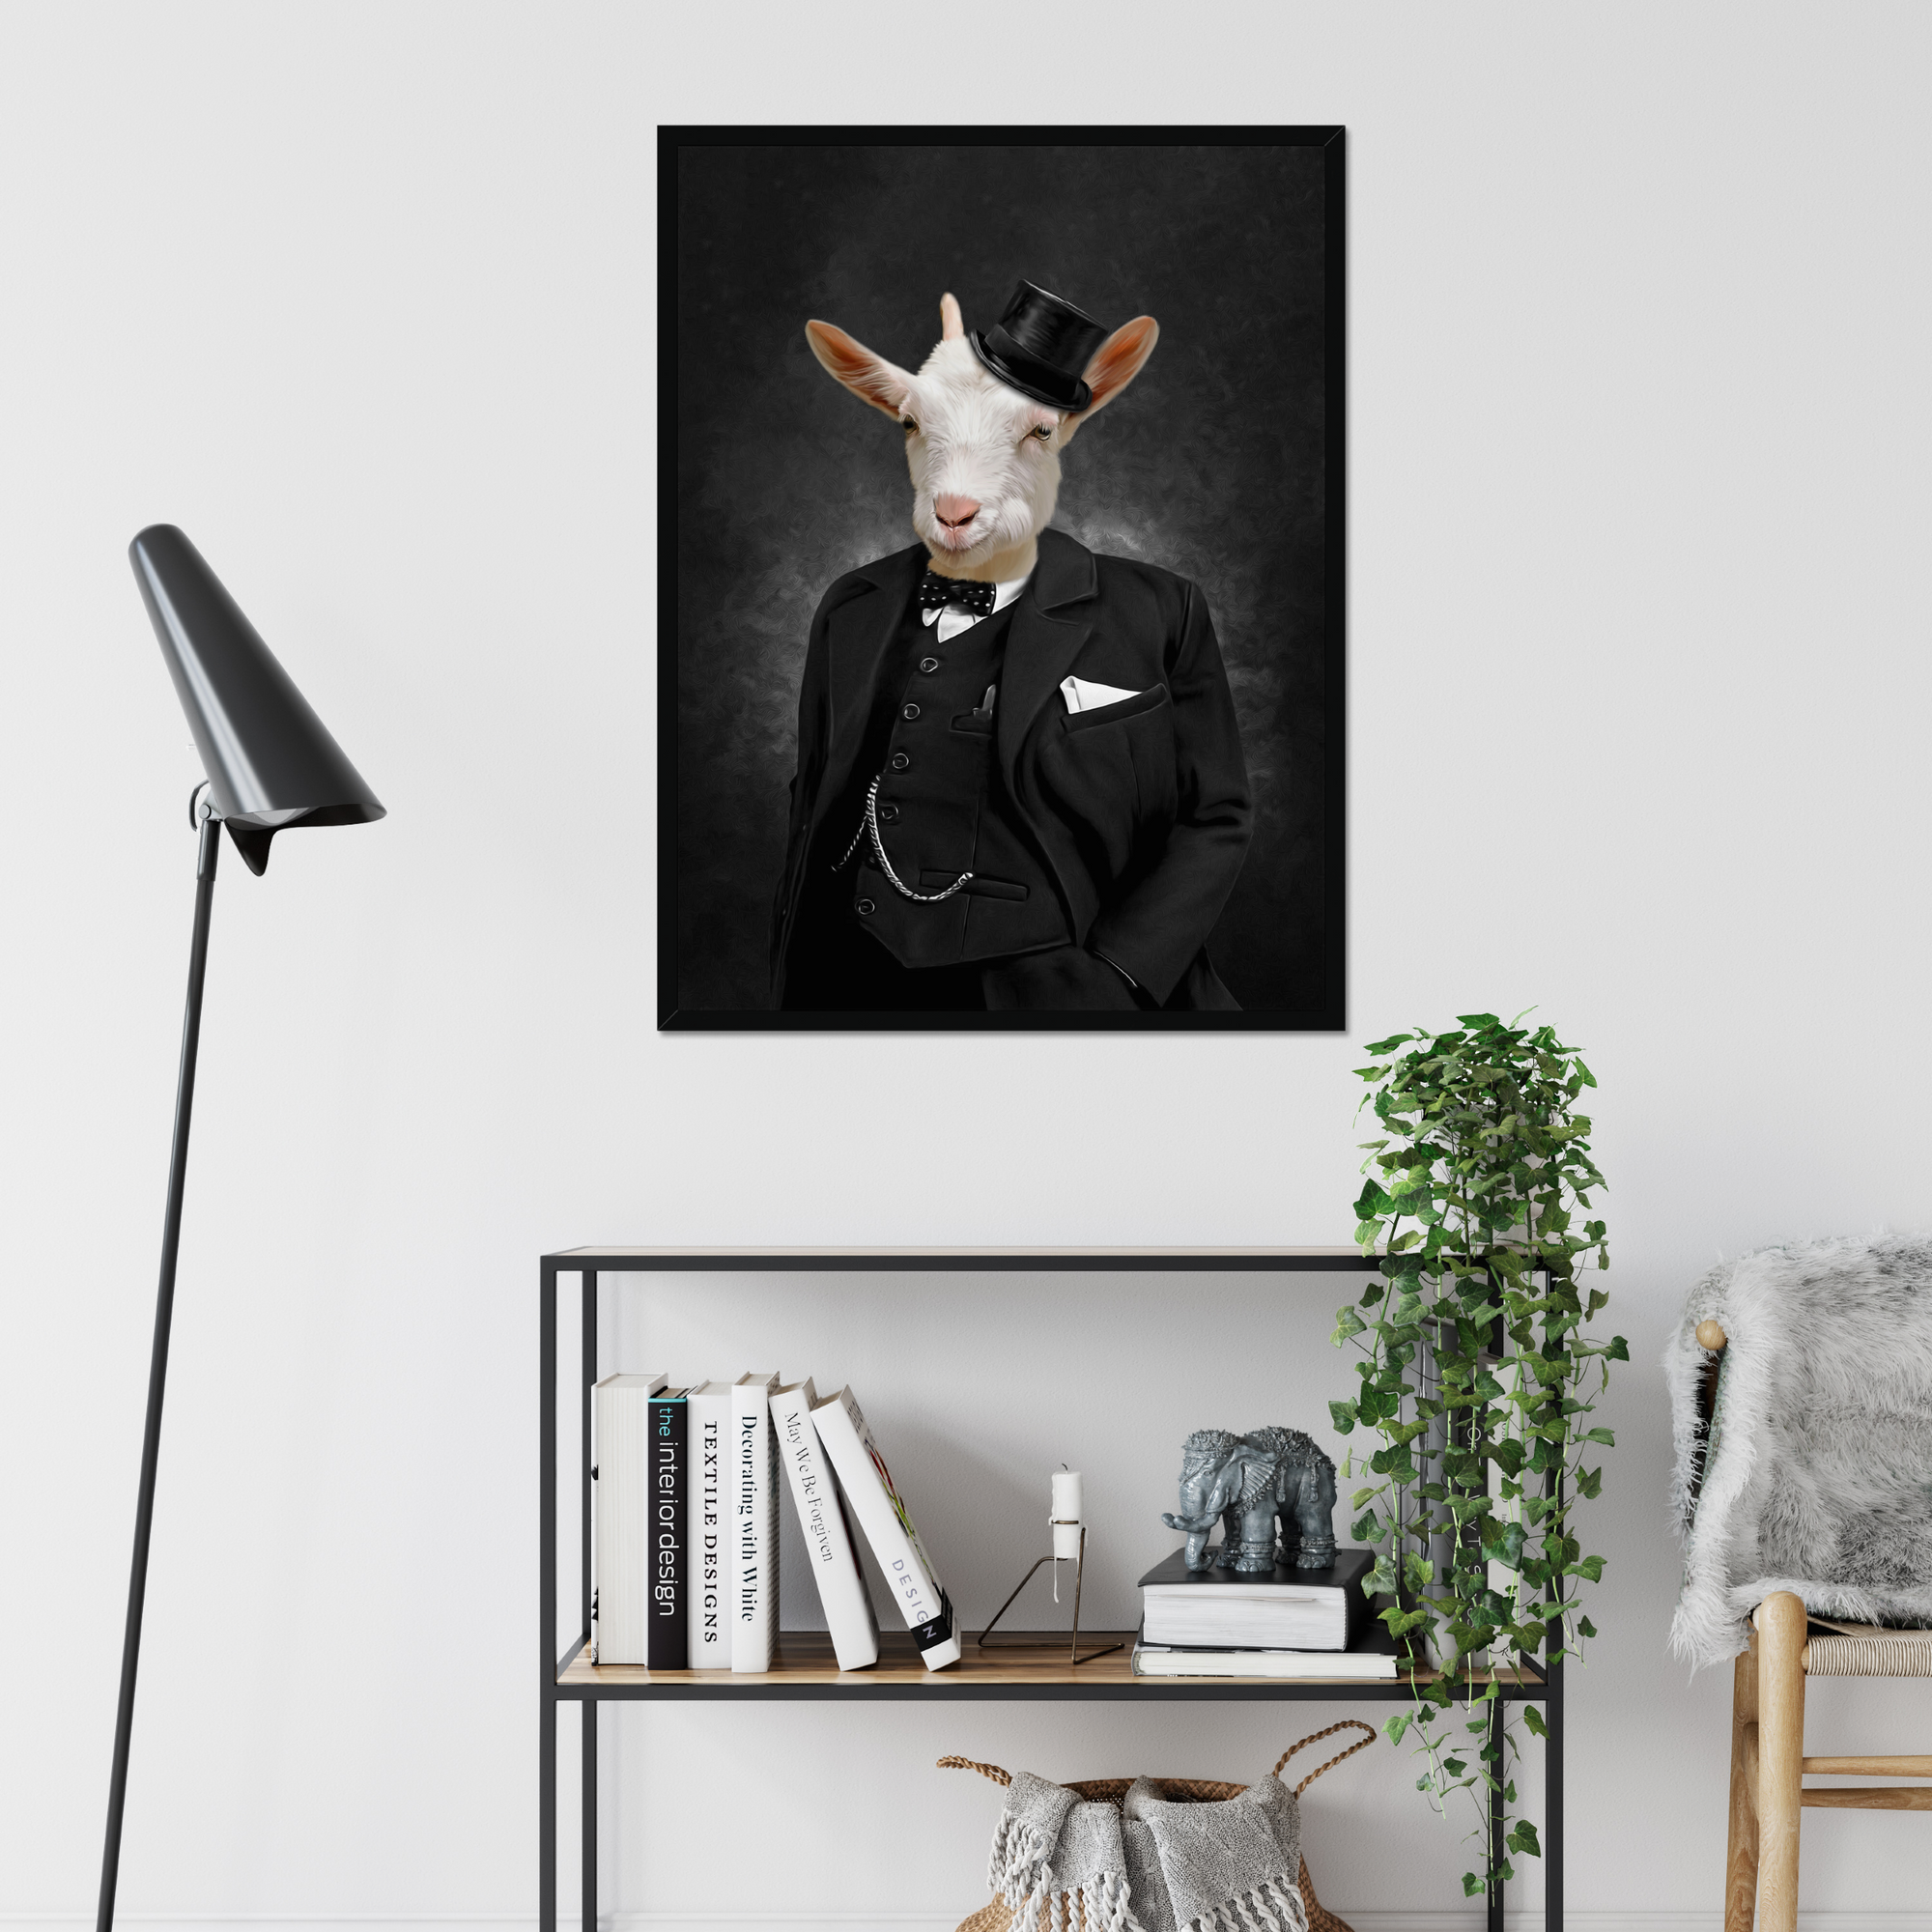 Paw & Glory, paw and glory, dog in suit portrait, pup portraits, pet portraits in costume, canvas print of my dog, get a painting of your dog, pet portraits in uniform, pet portrait